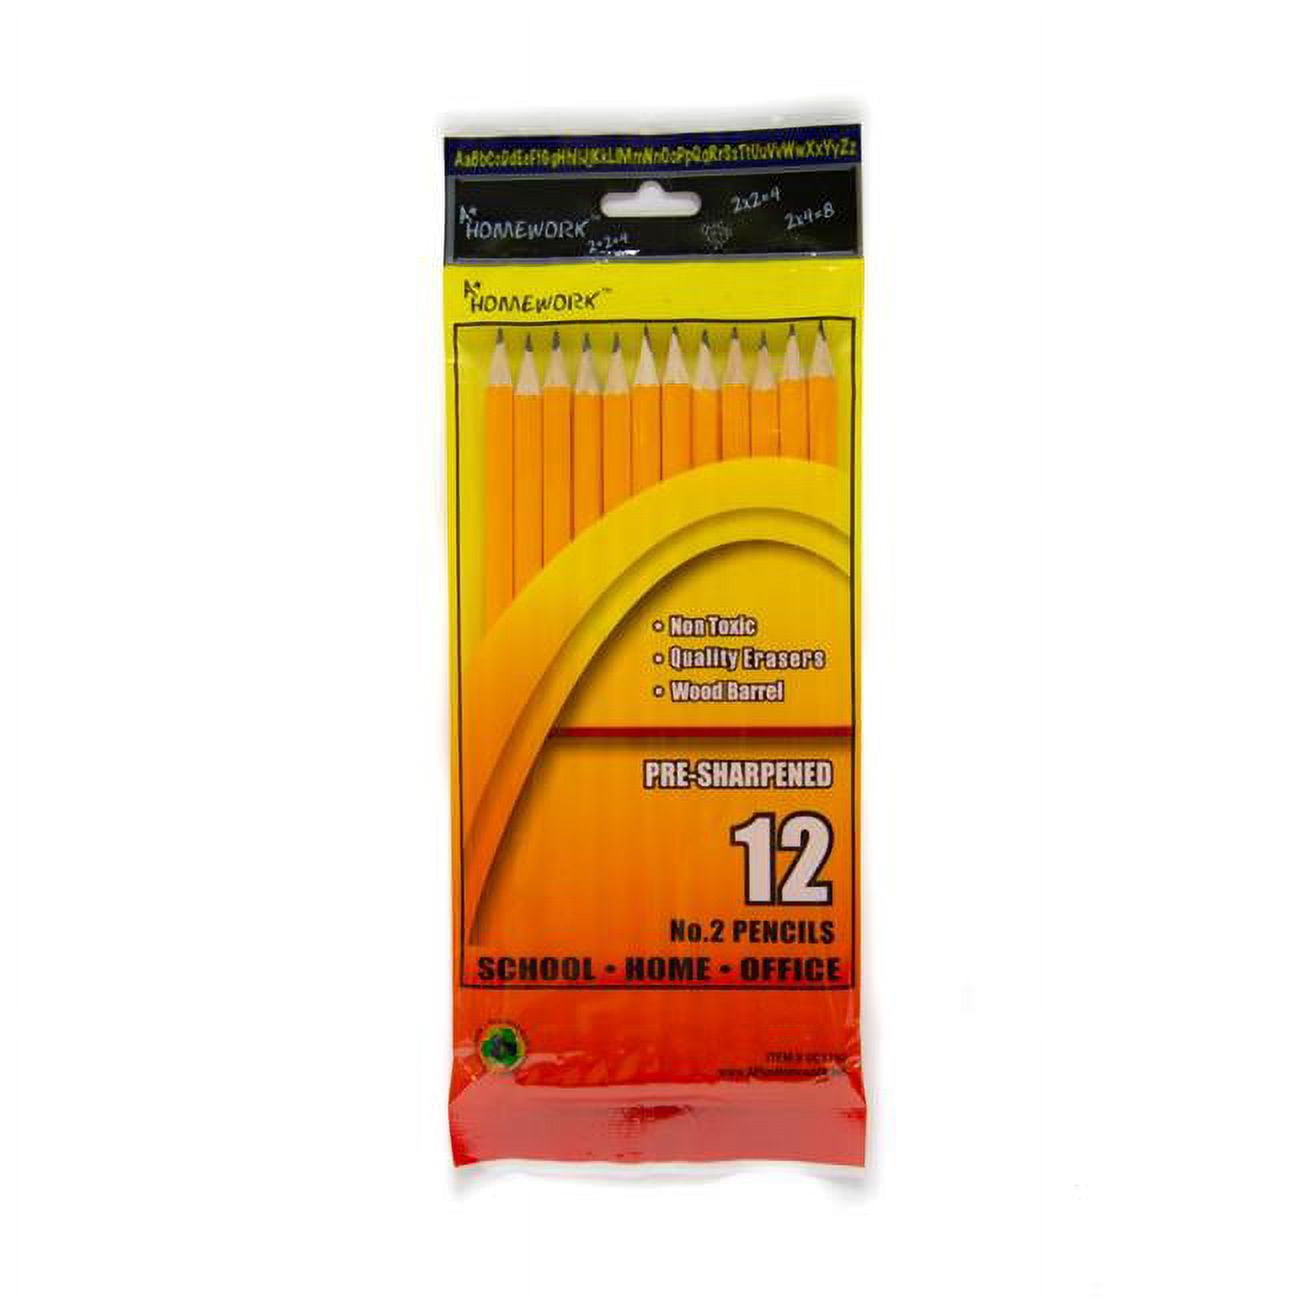 Picture of DDI 2334616 A+ Homework #2 Pencils -12 Count  Pre-Sharpened Case of 48